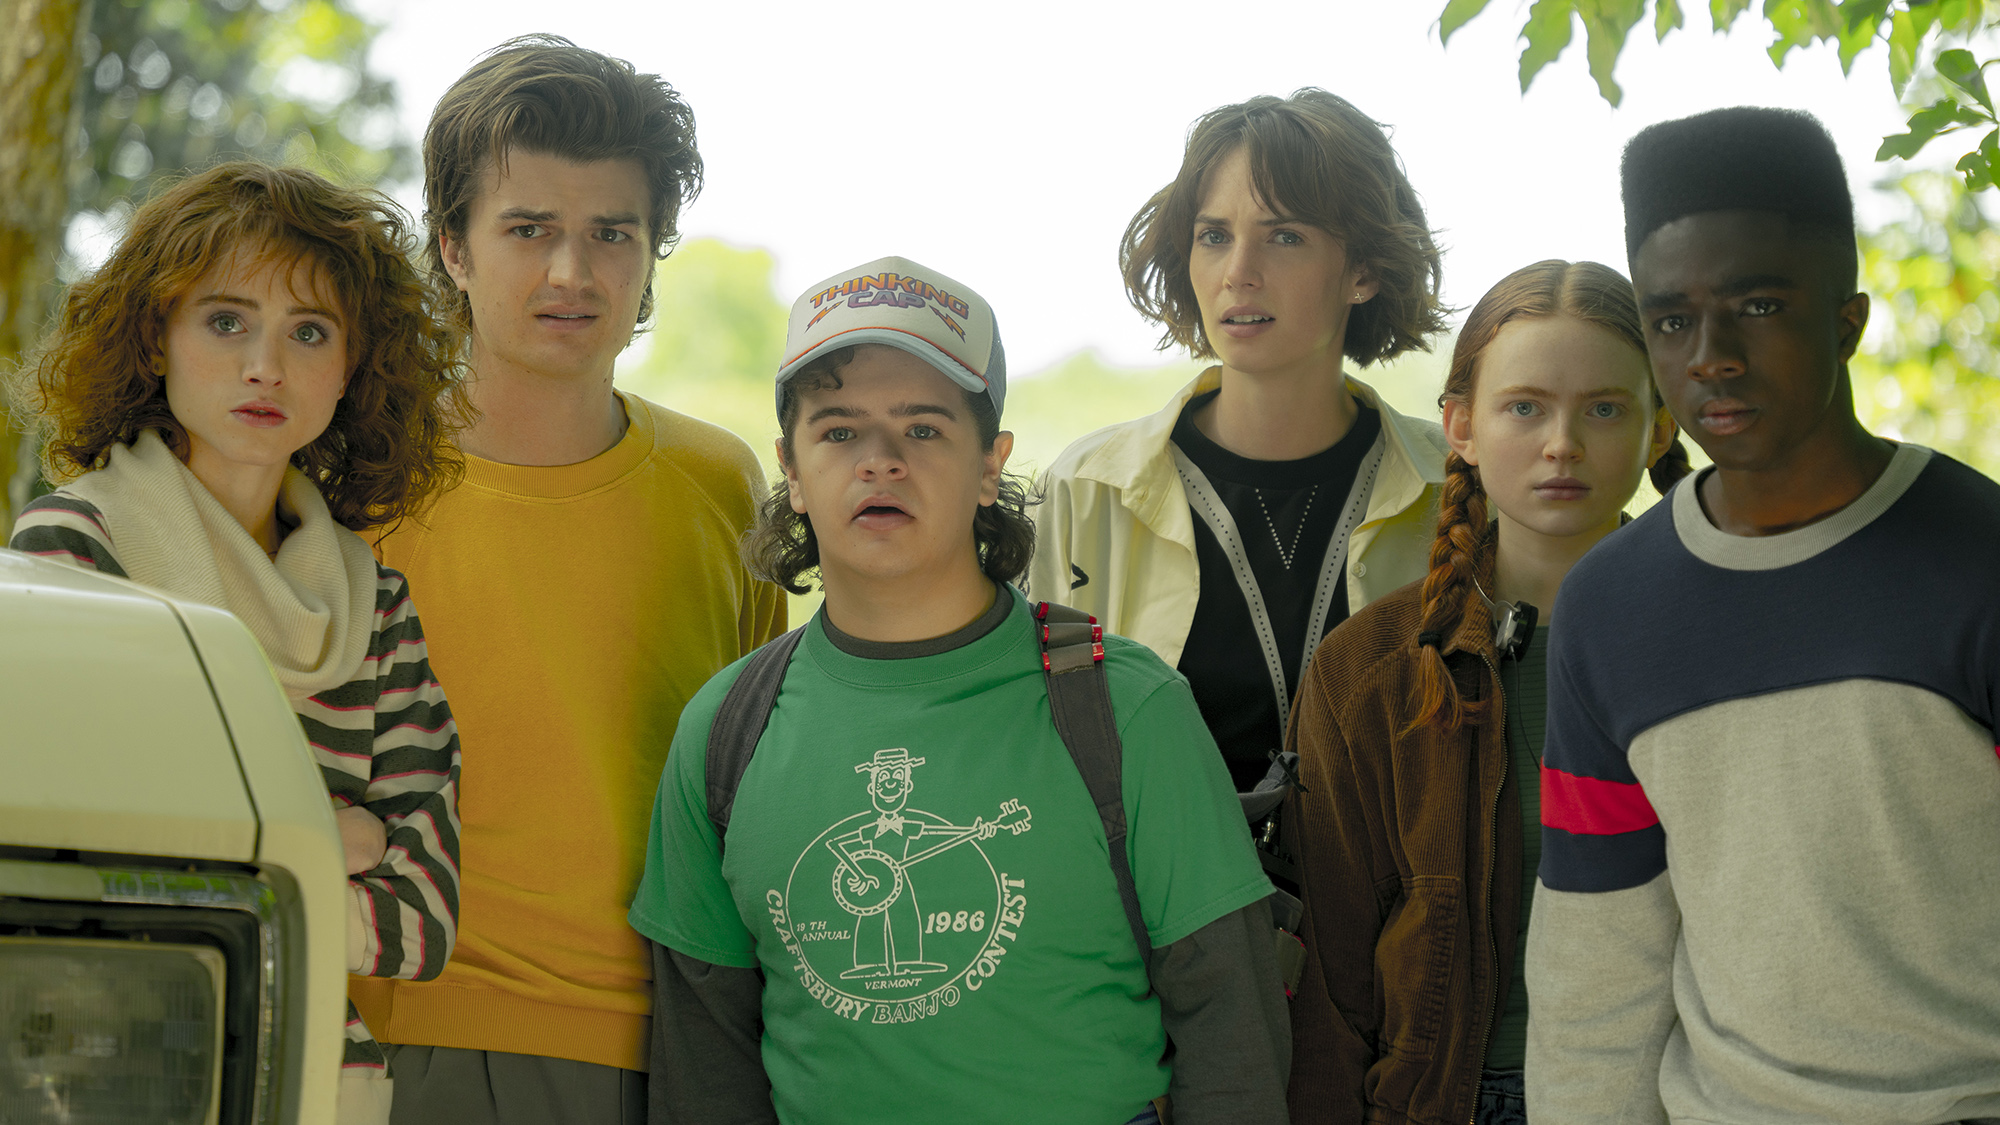 Everything We Know About the Rumored 'Stranger Things' Spinoff